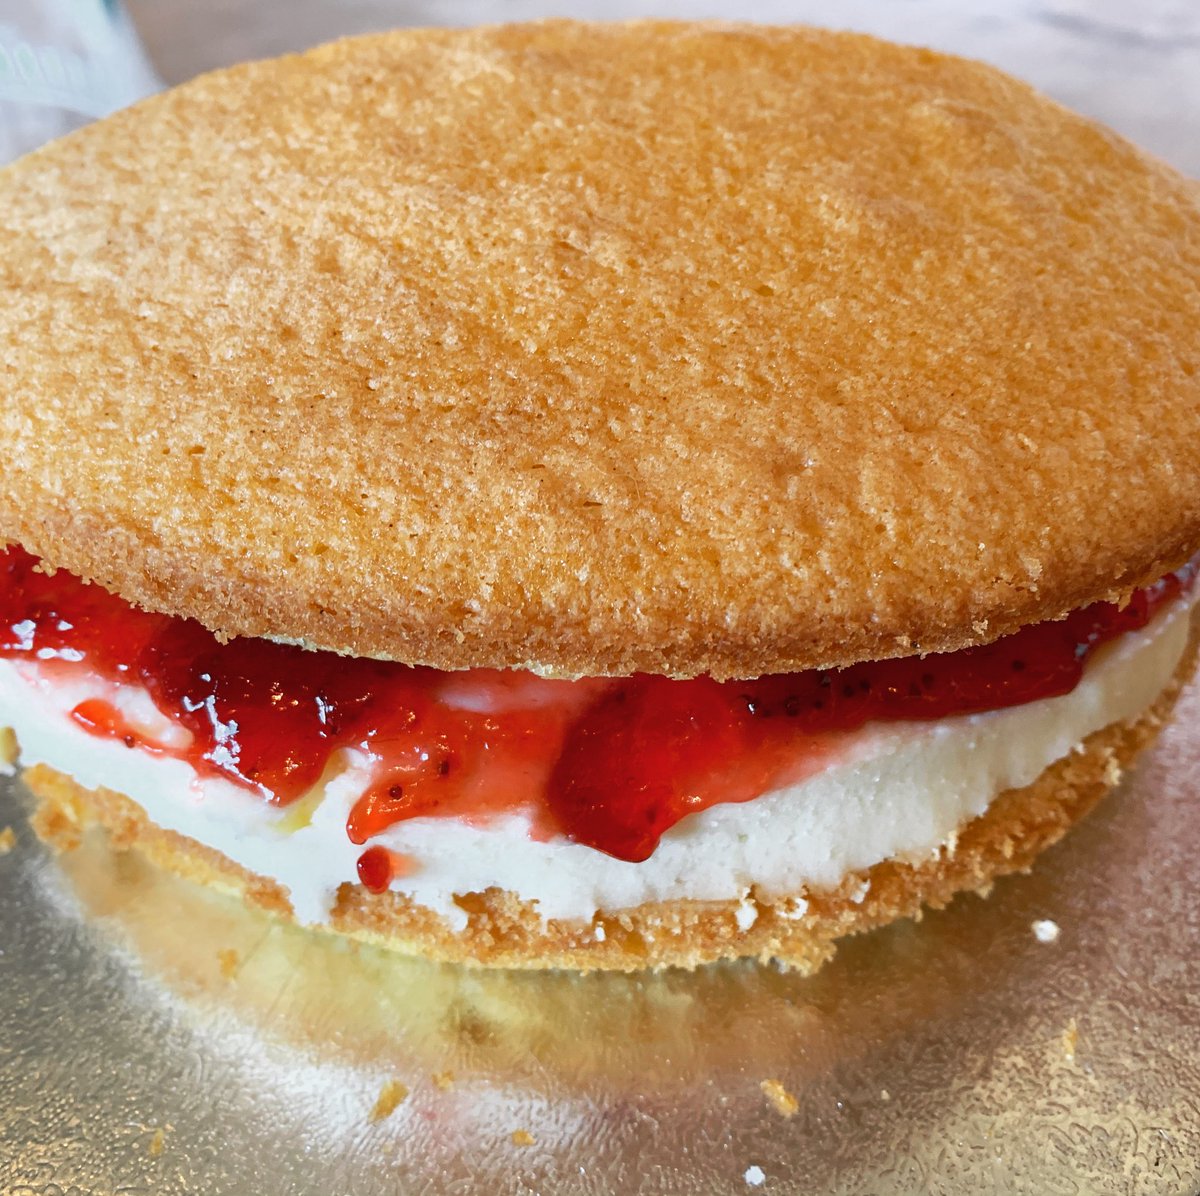 If you’re thinking of treating yourself to cake or dinner, today’s the day for Victoria sponge 🍰 we’ve space today but are fully booked from 12 tomorrow 👍